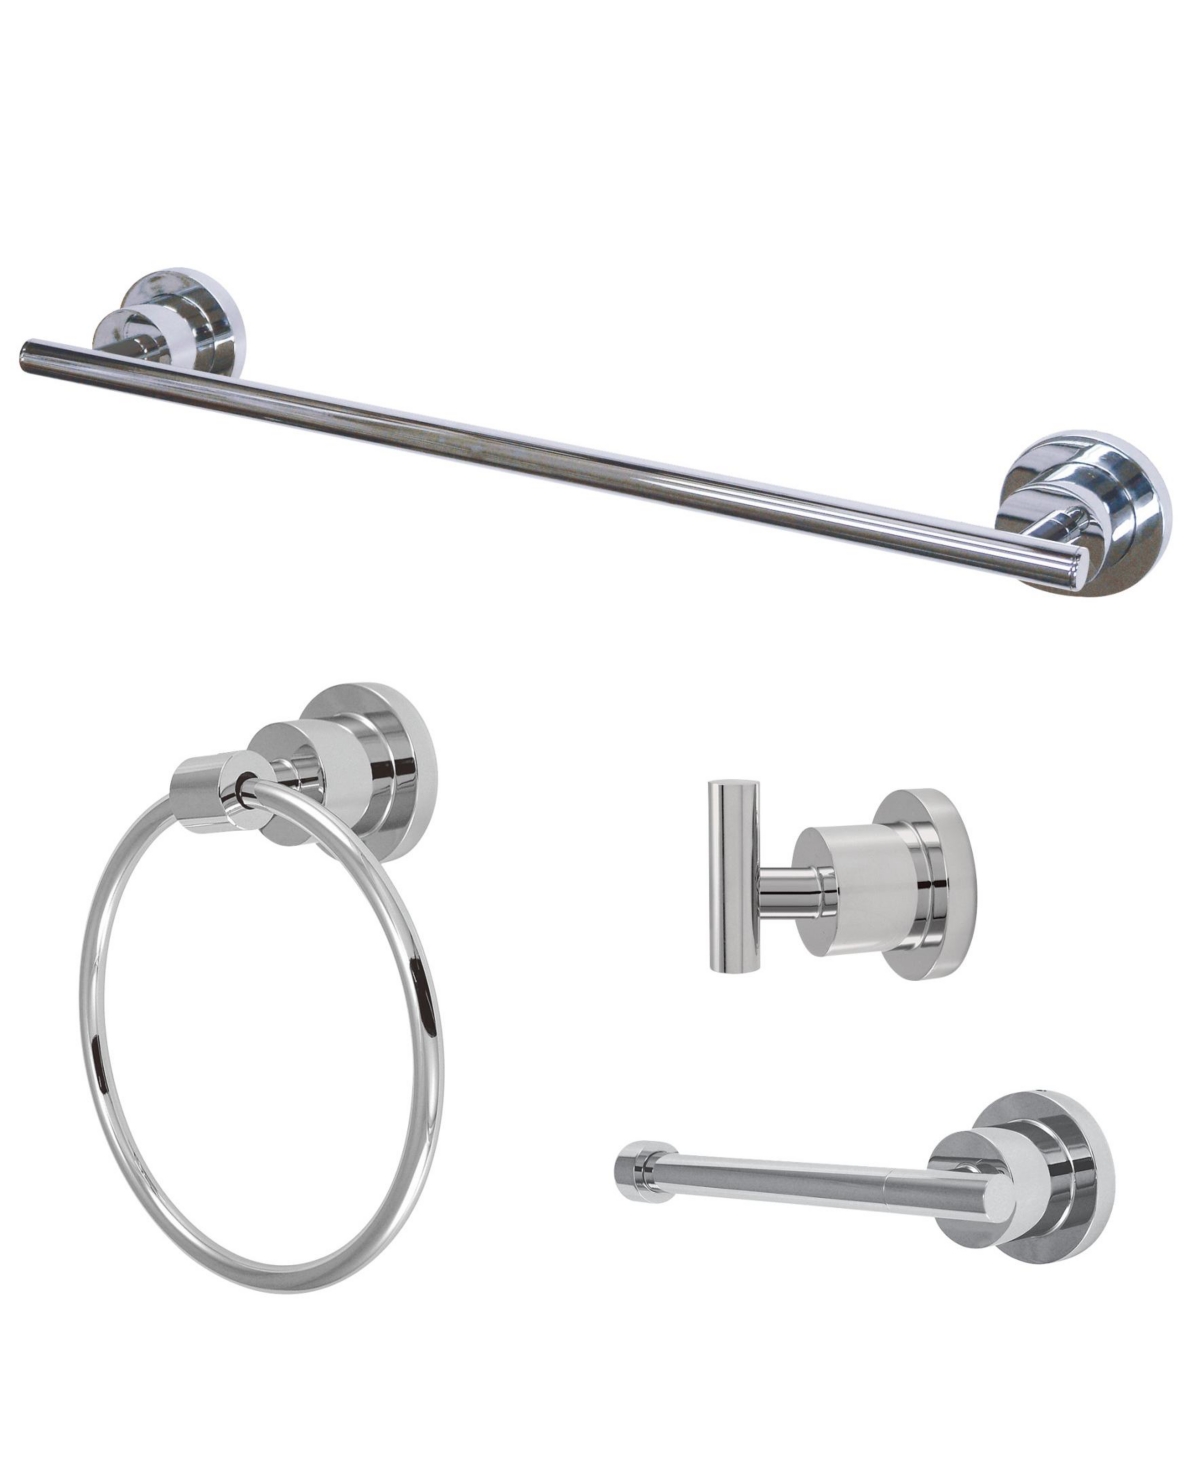 Kingston Brass Concord Modern 4-Pc. Bathroom Accessories Set in Polished Chrome Bedding